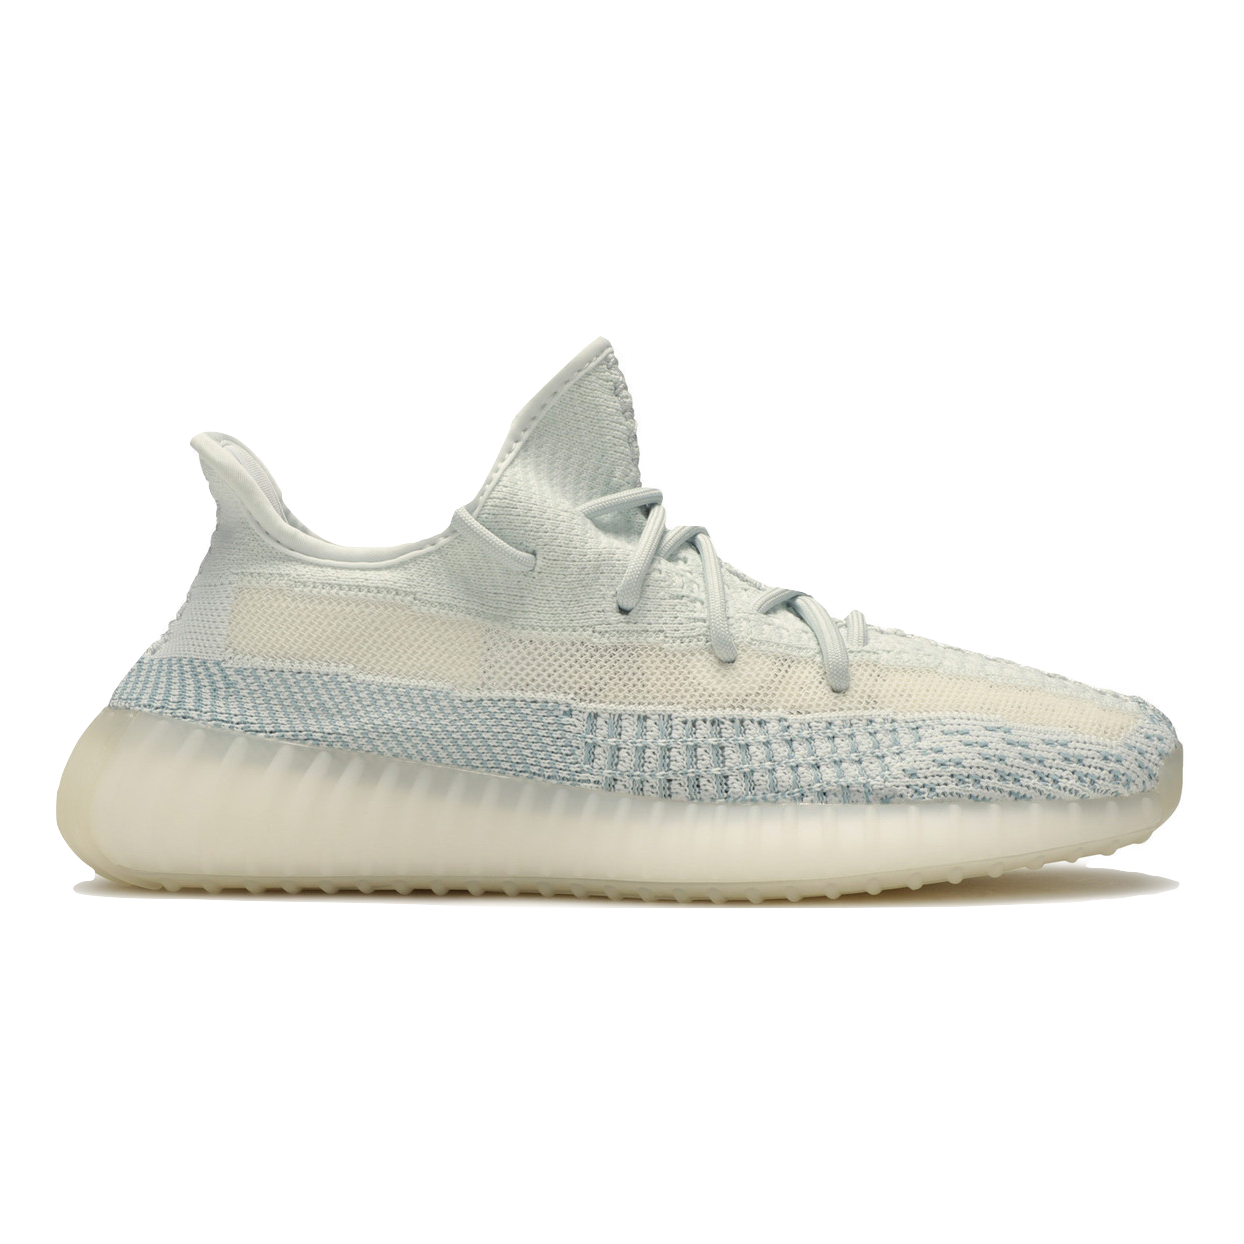 Yeezy Boost 350 V2 - Cloud White Non Reflective - Used